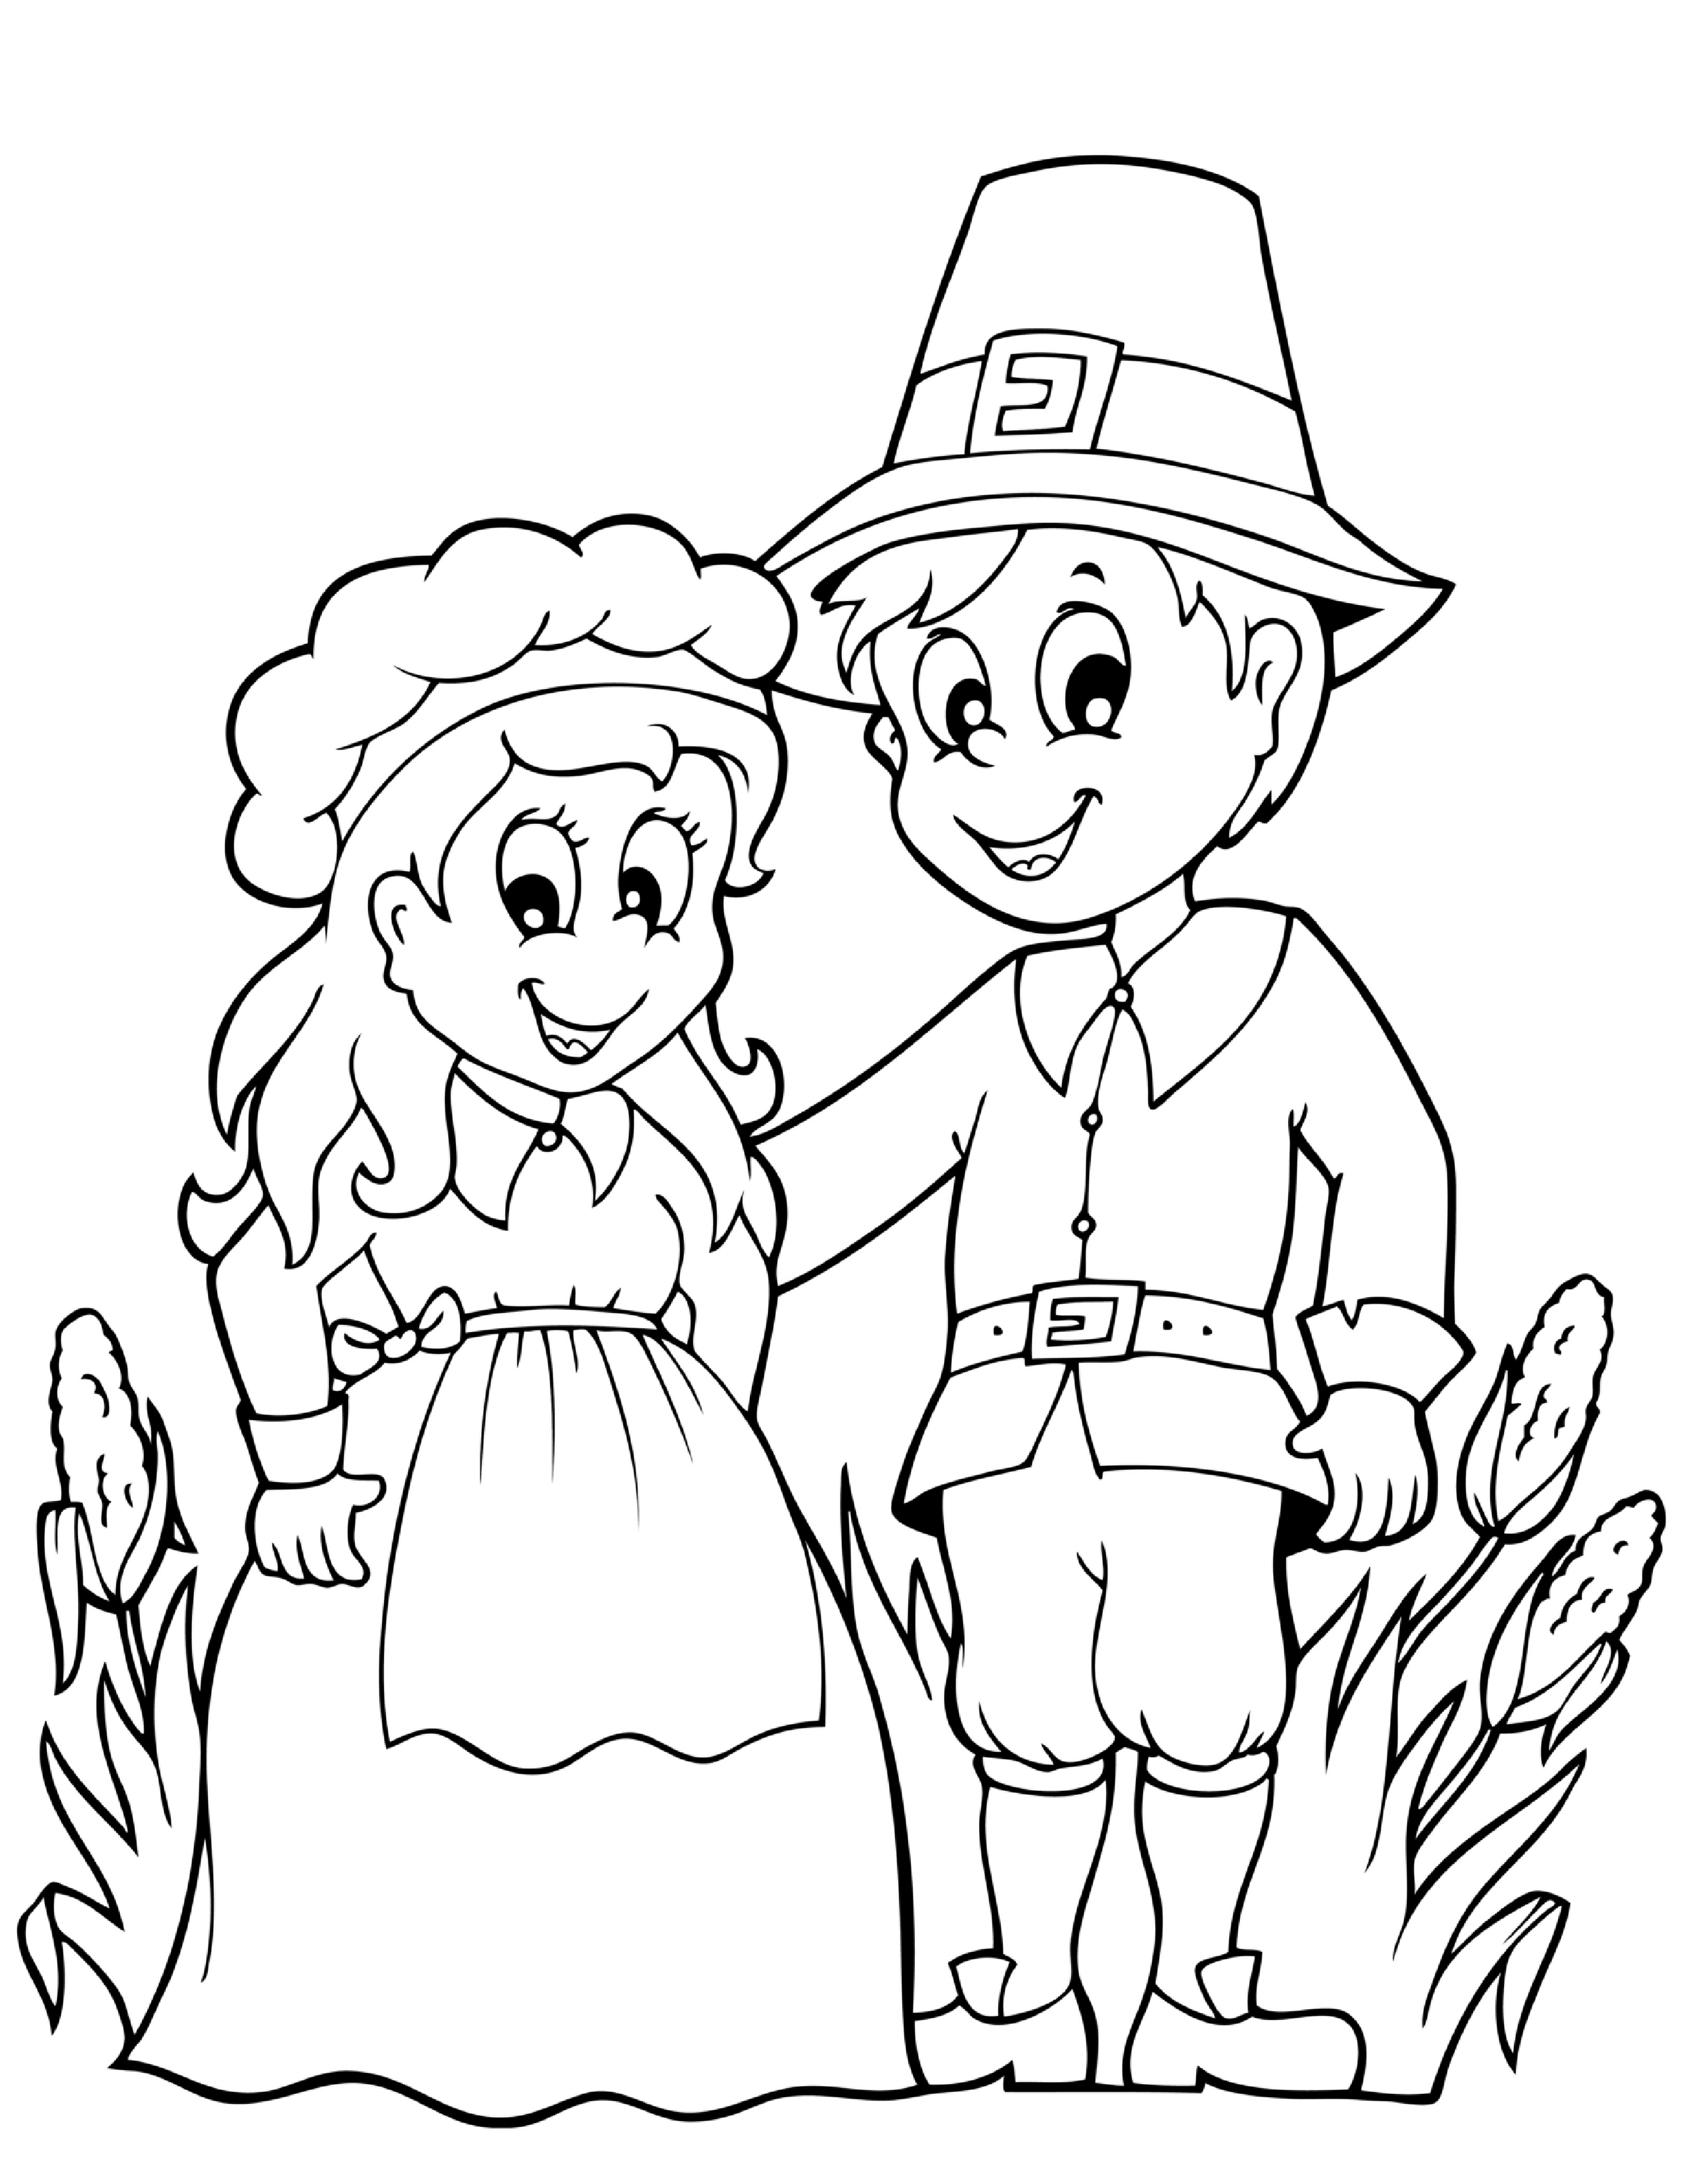 Happy Thanksgiving Coloring Page Pilgrim Coloring Page one of the six available in the Thanksgiving Color Pages Bundle